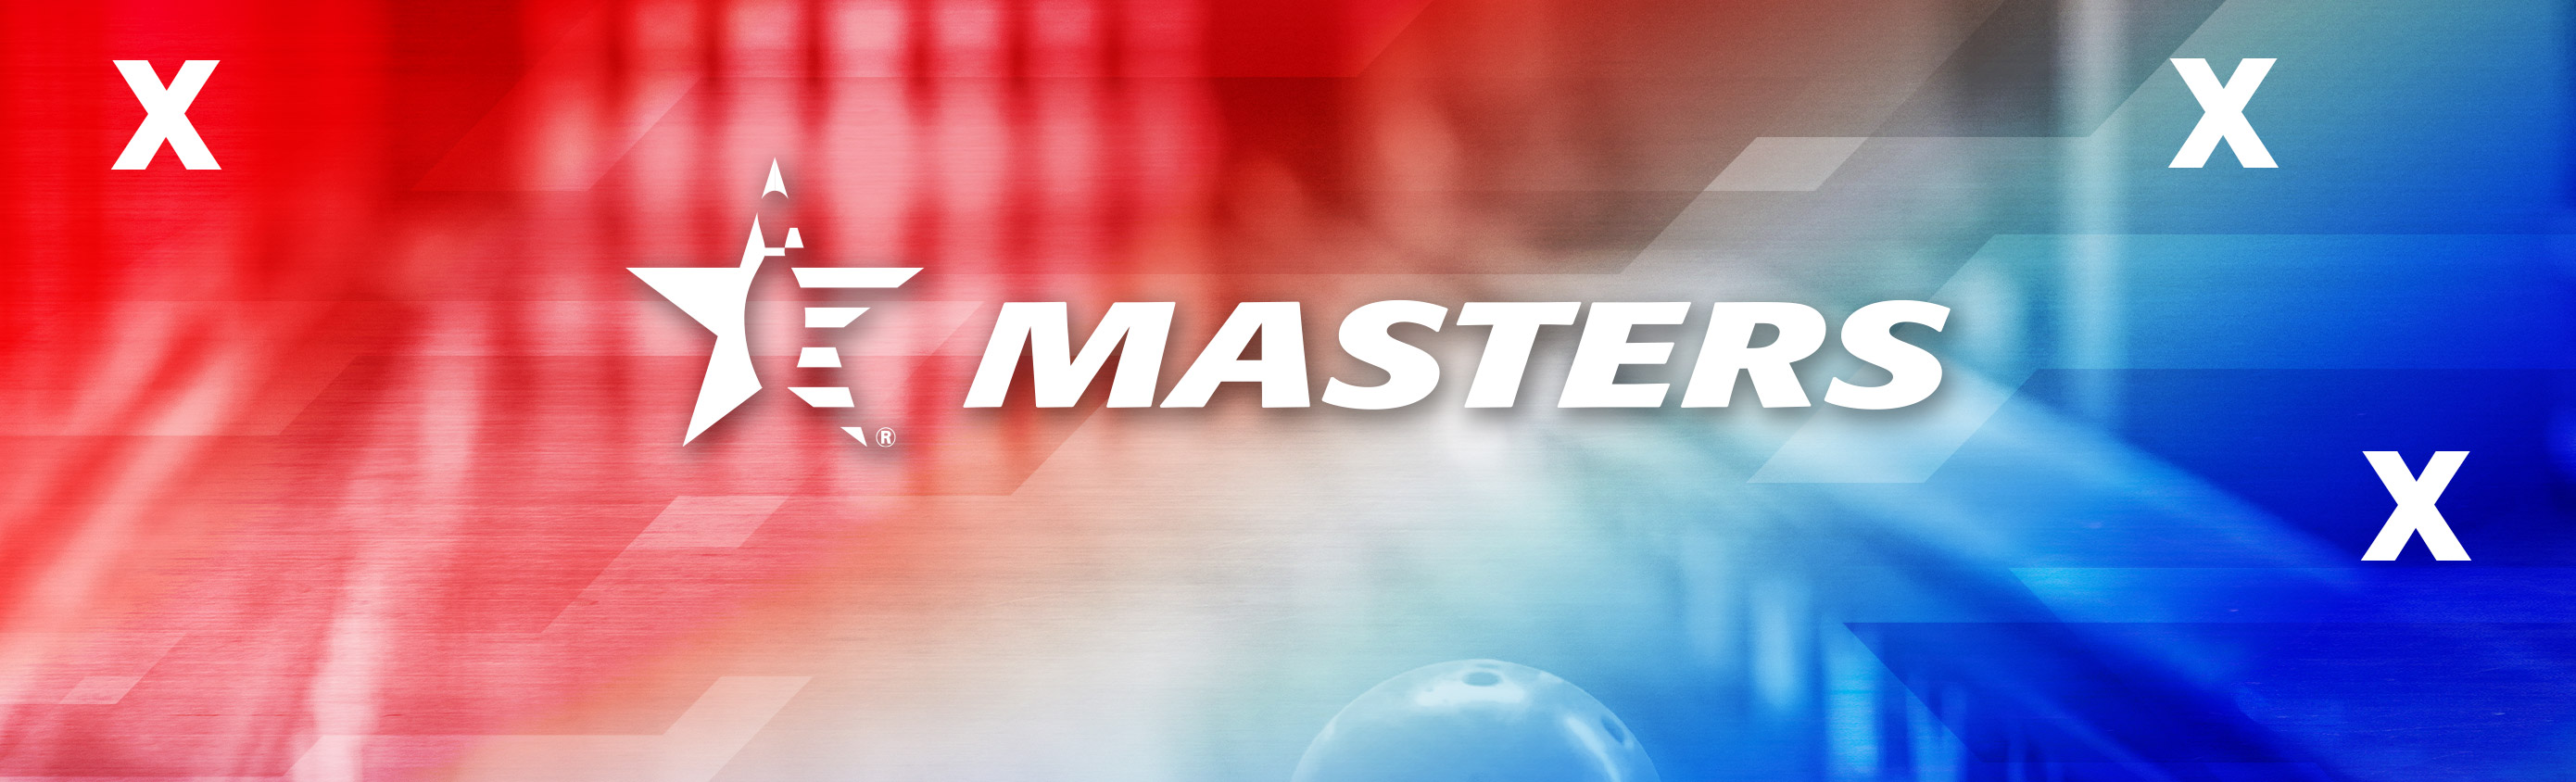 2023 USBC Masters Preview